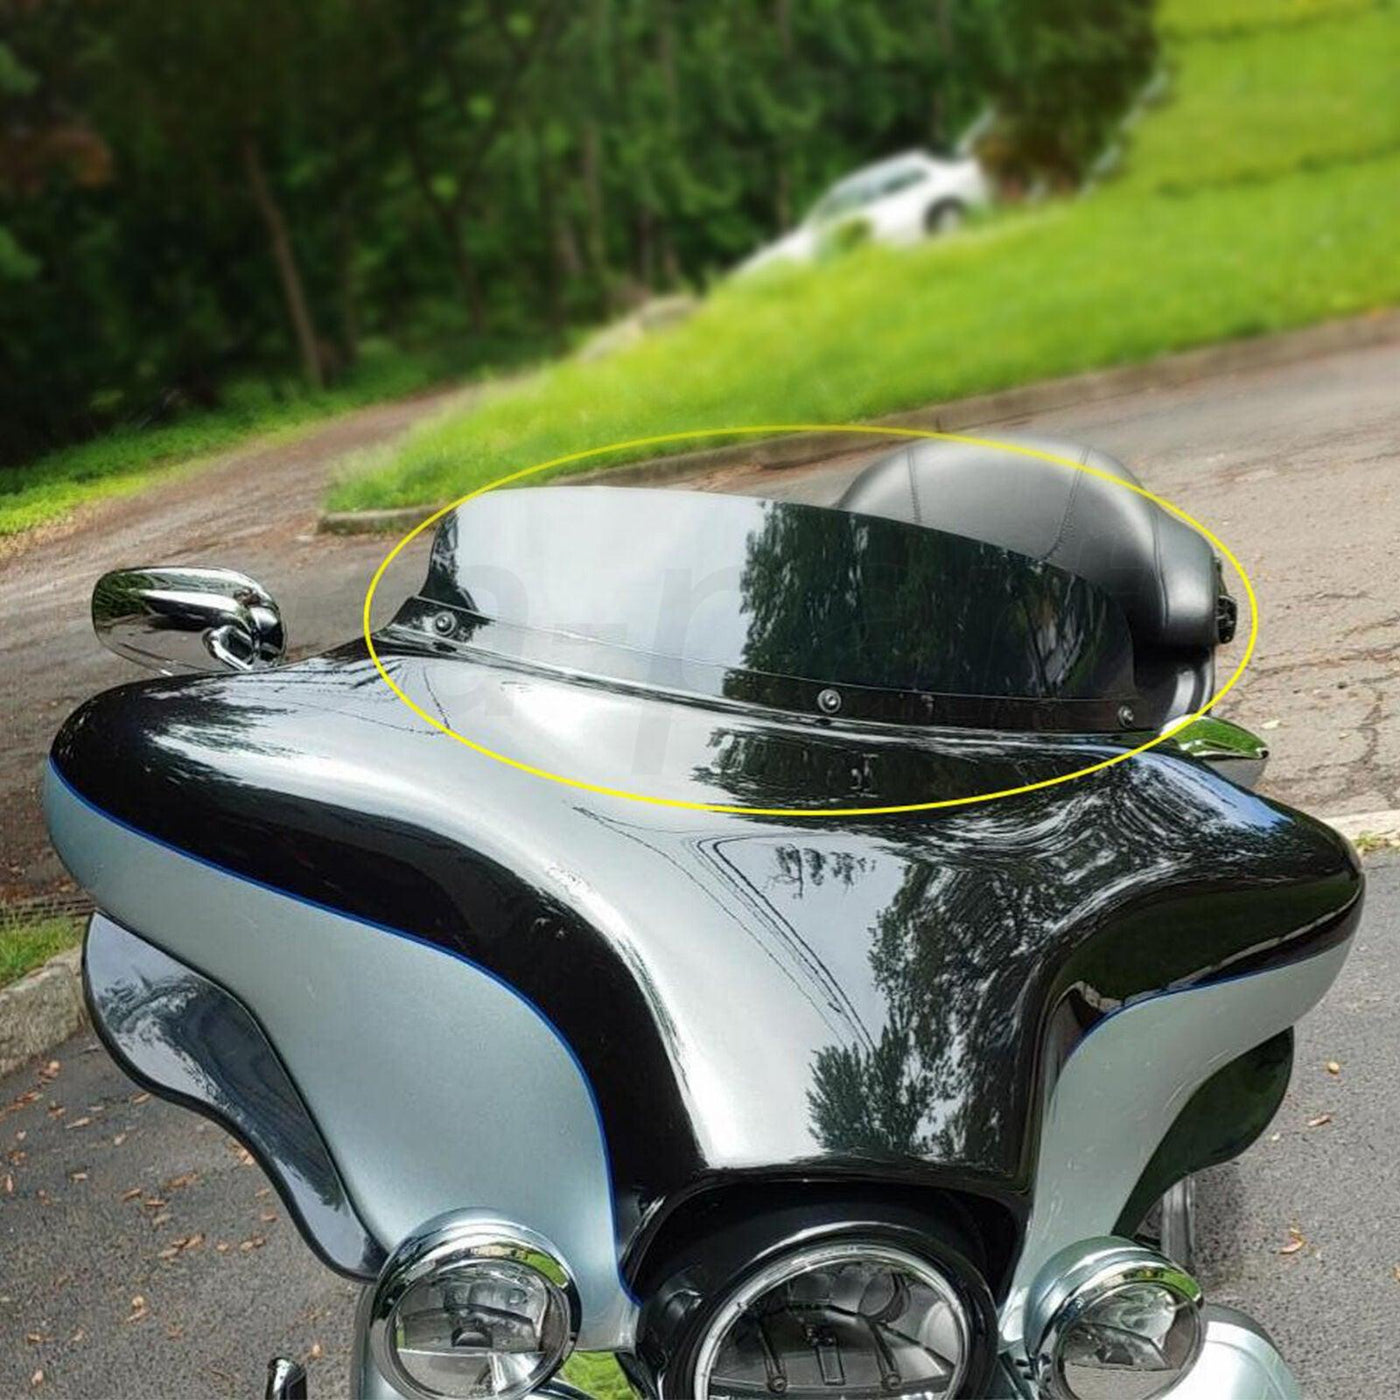 Black 5" Windshield Windscreen Fit For Harley Electra Glide Ultra Classic 96-13 - Moto Life Products